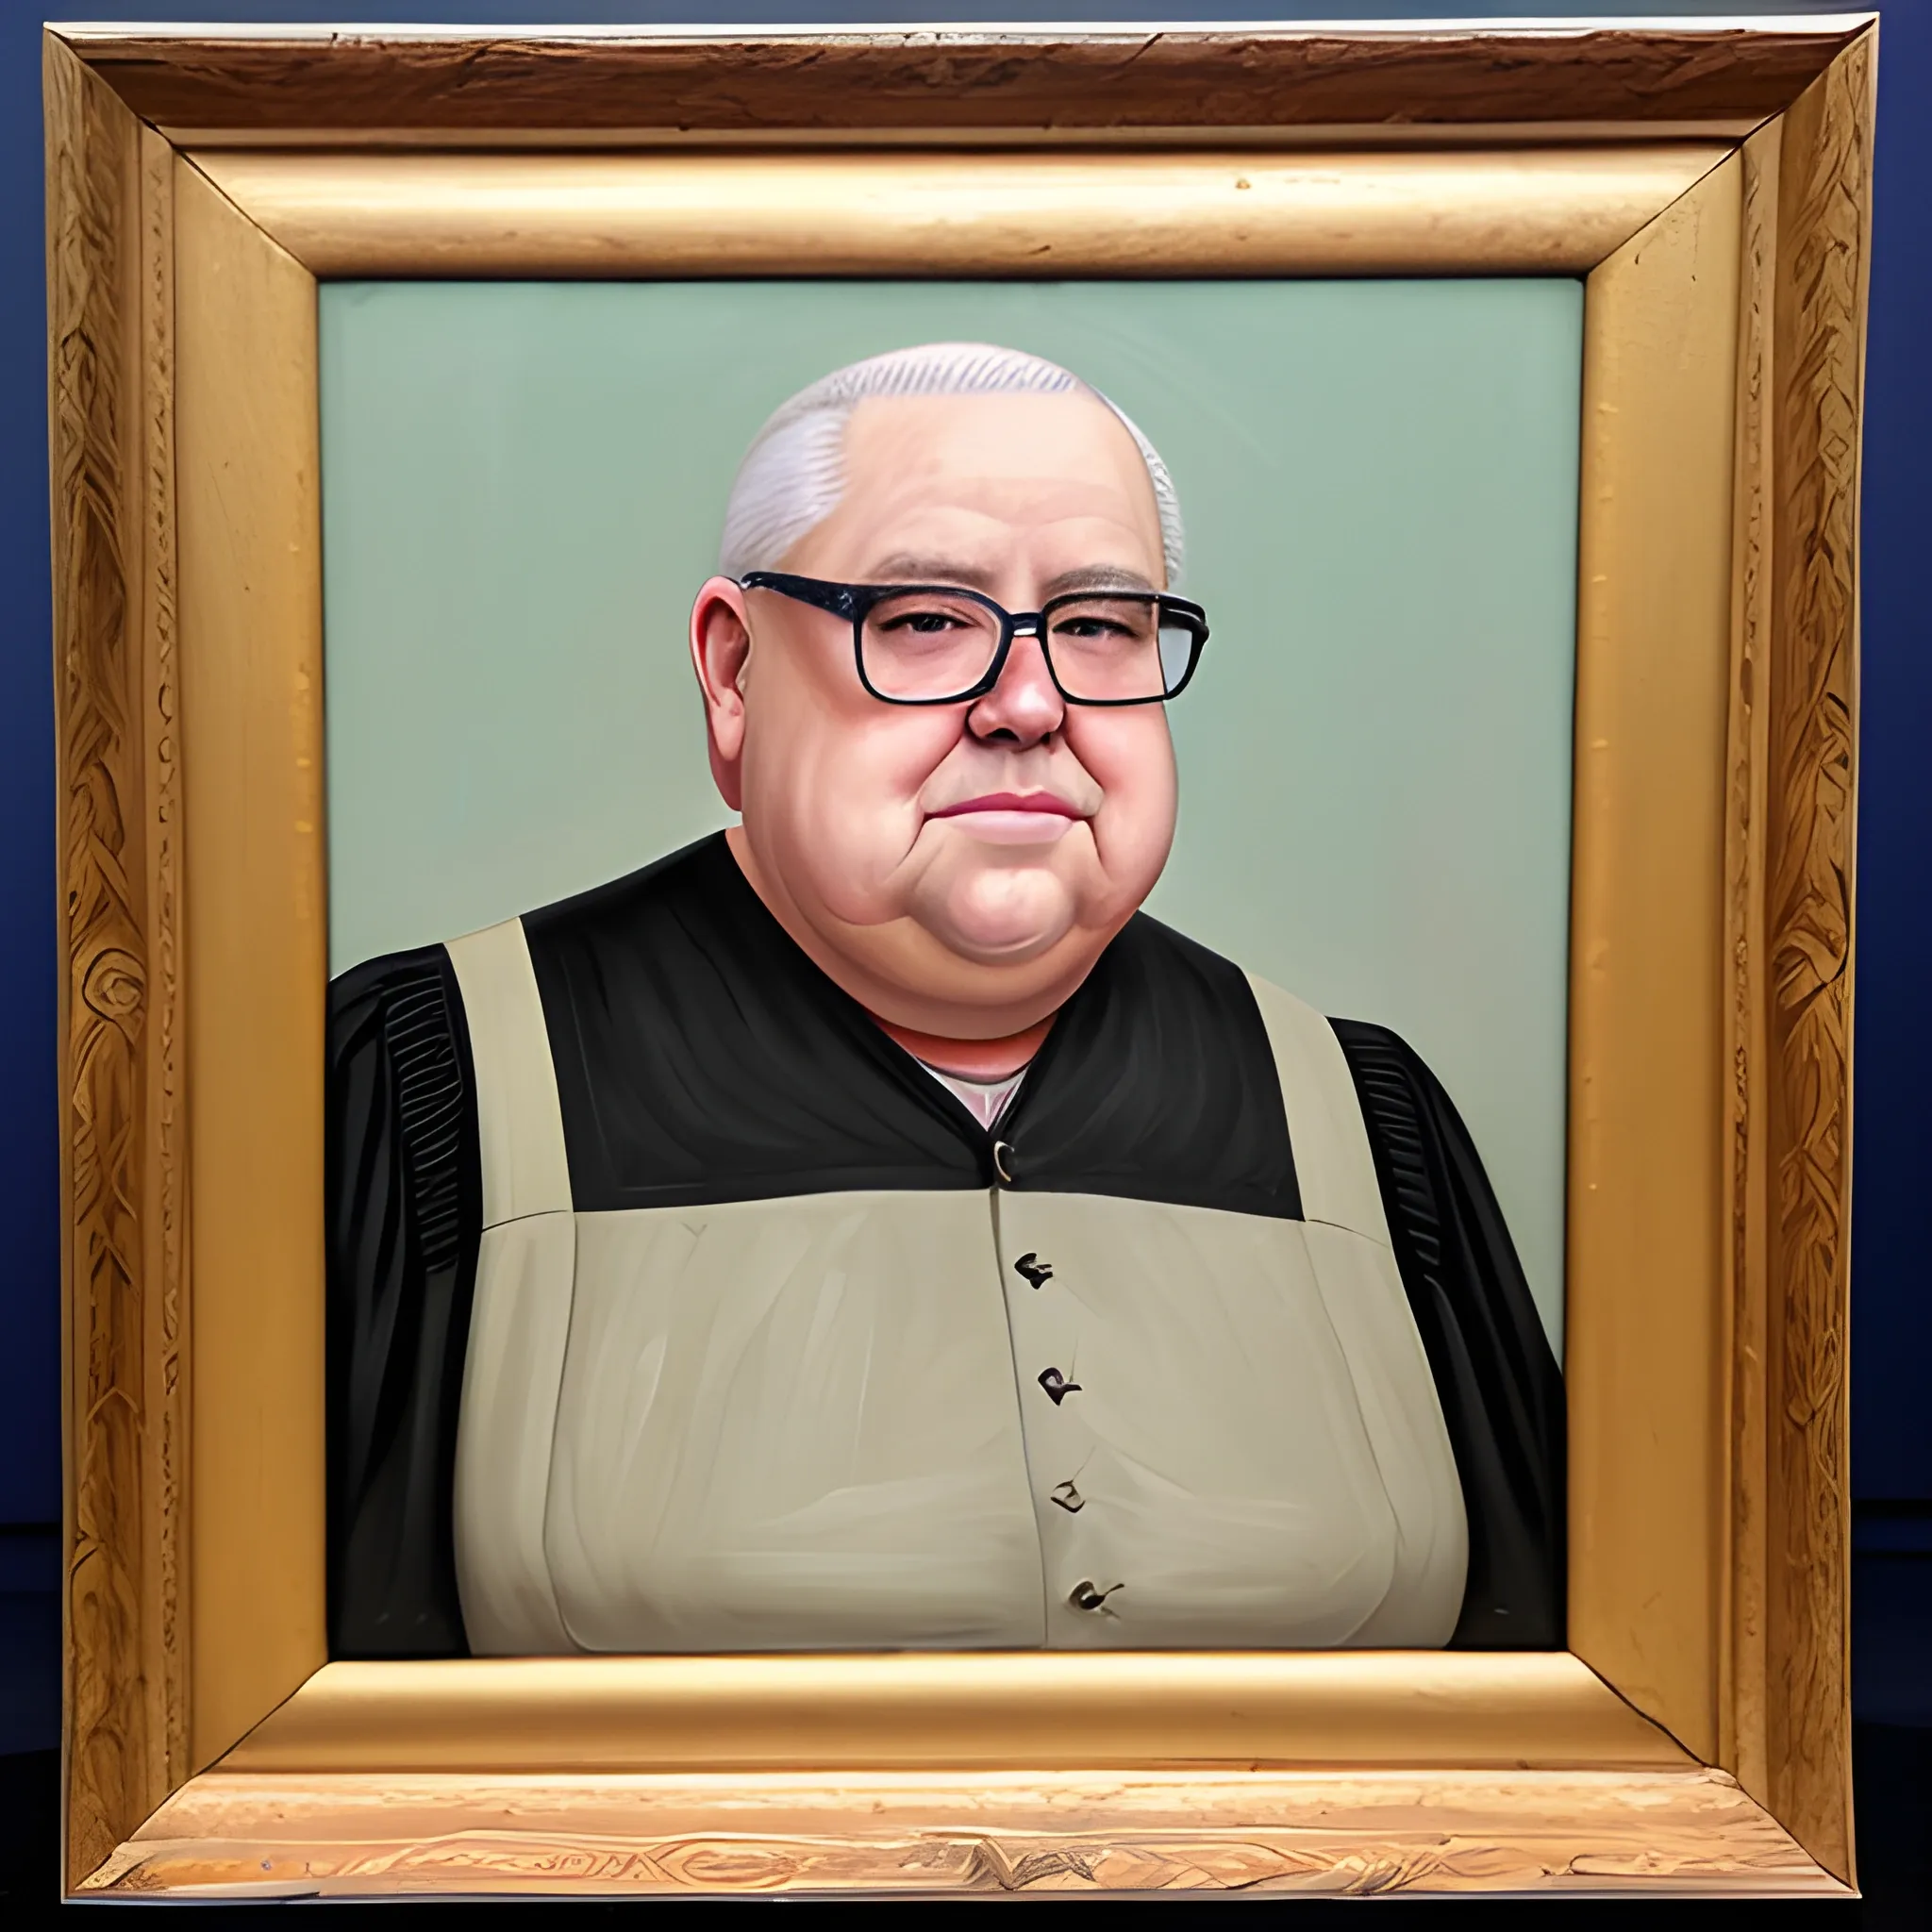 Man 70 years old fat, str8ct judge, thick glasses, anerican, Oil Painting